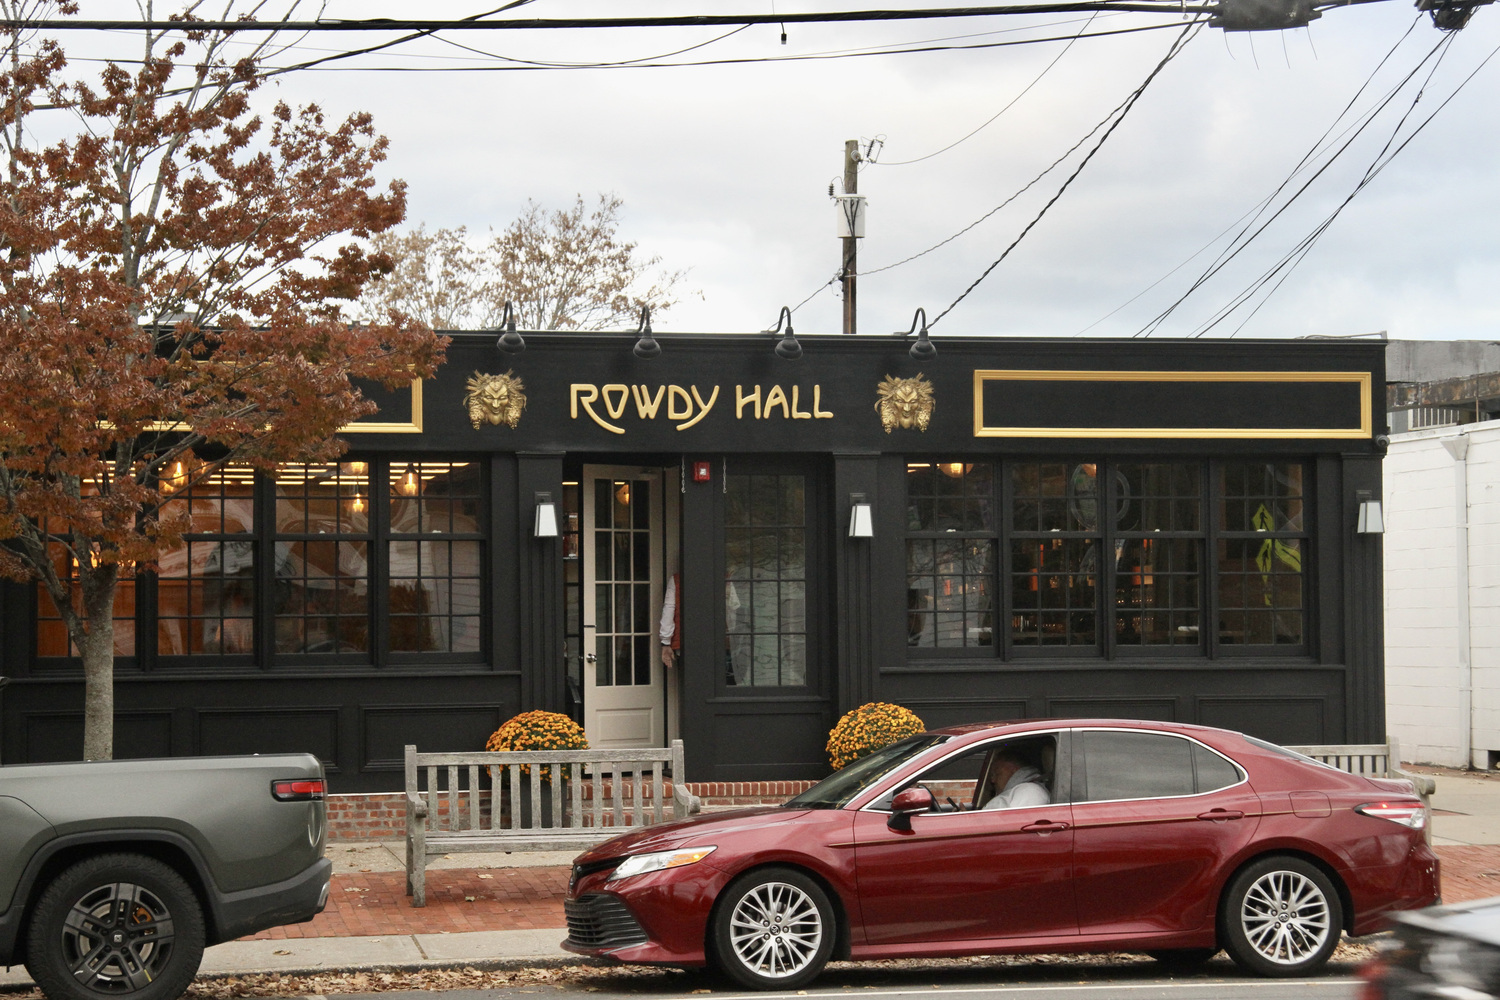 Rowdy Hall opened this week behind a new black frontage.